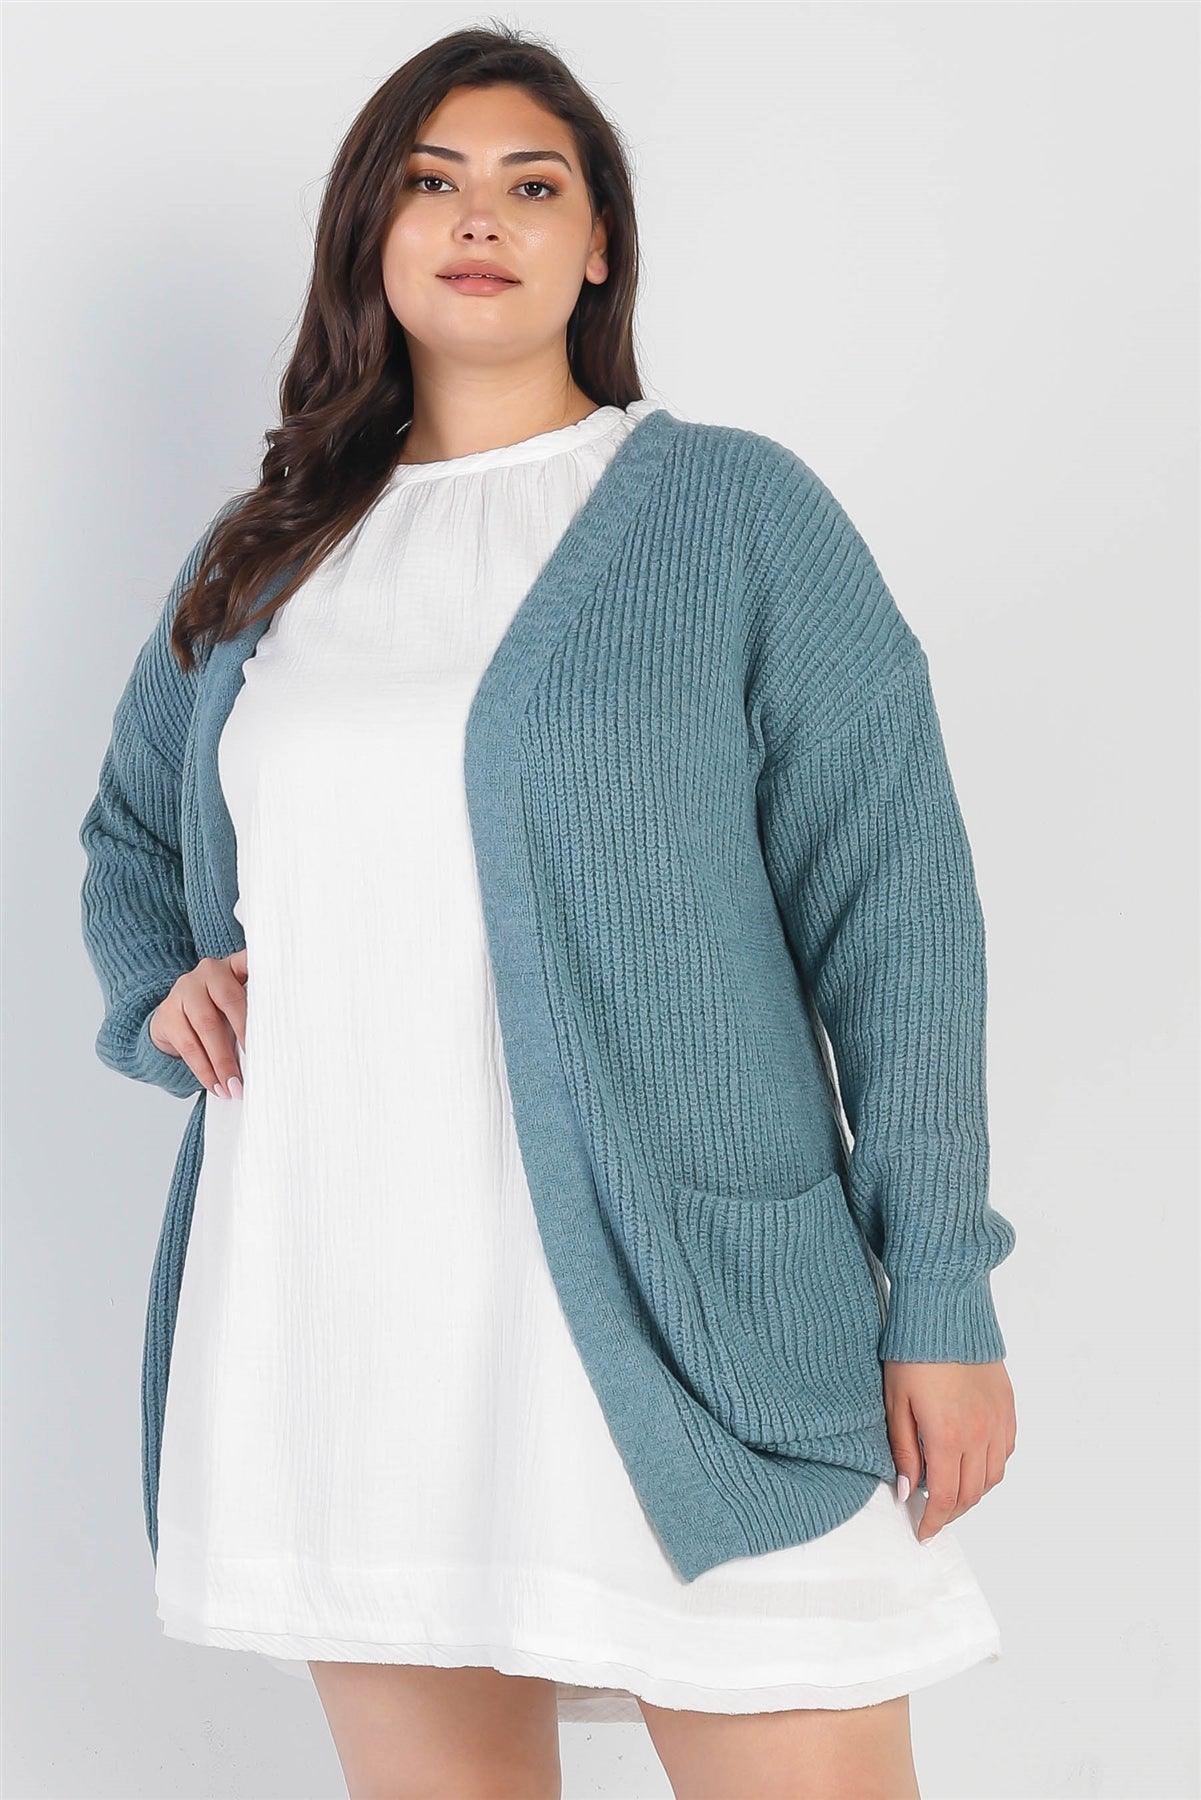 Junior Plus Emerald Blue Knit Open Front Two Pocket Cardigan /2-2-2